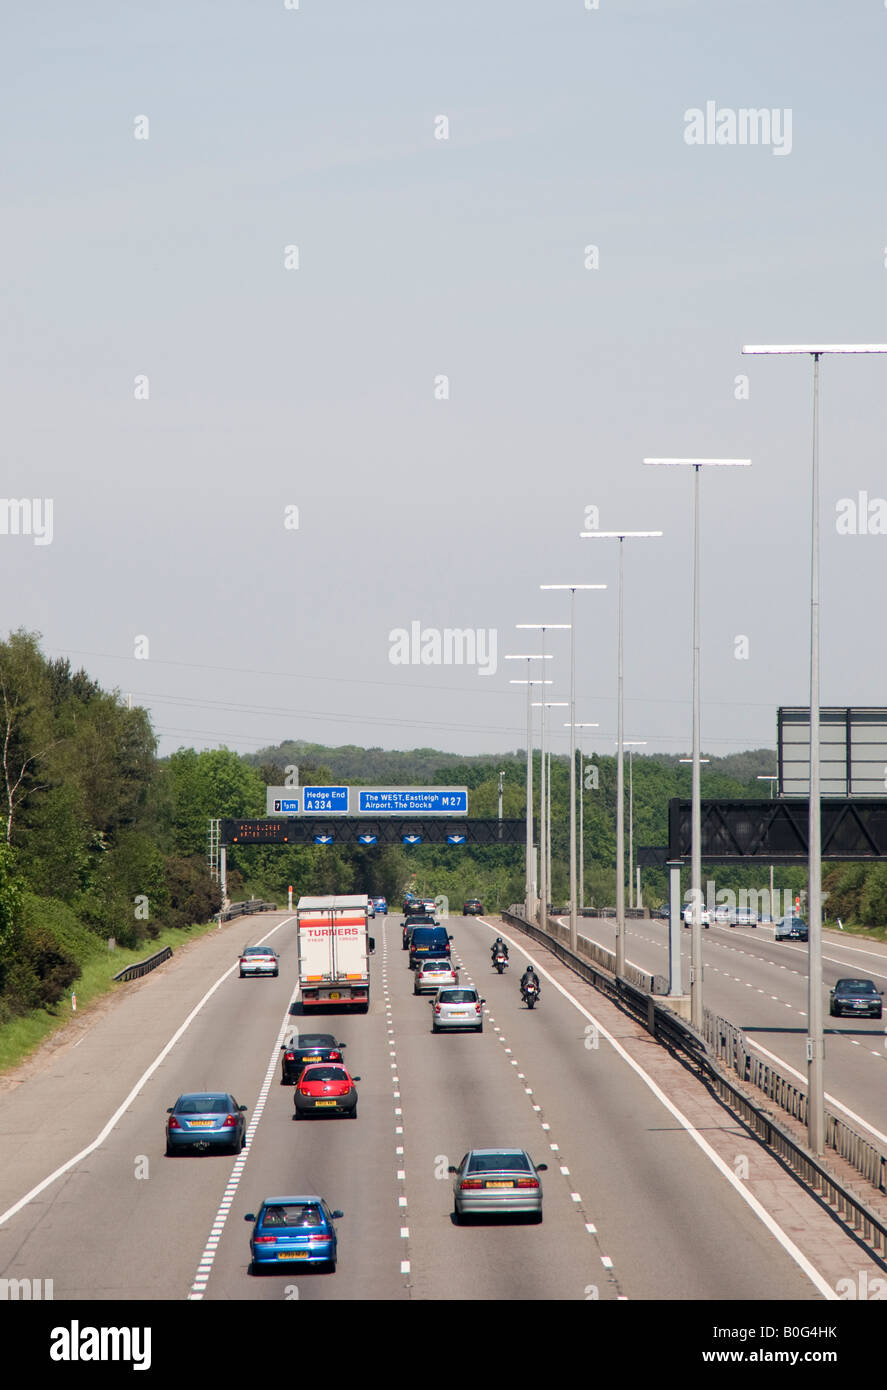 Motorway traffic on the M27 near Southampton England on a normal day showing various signs gantries and lane marking etc Stock Photo